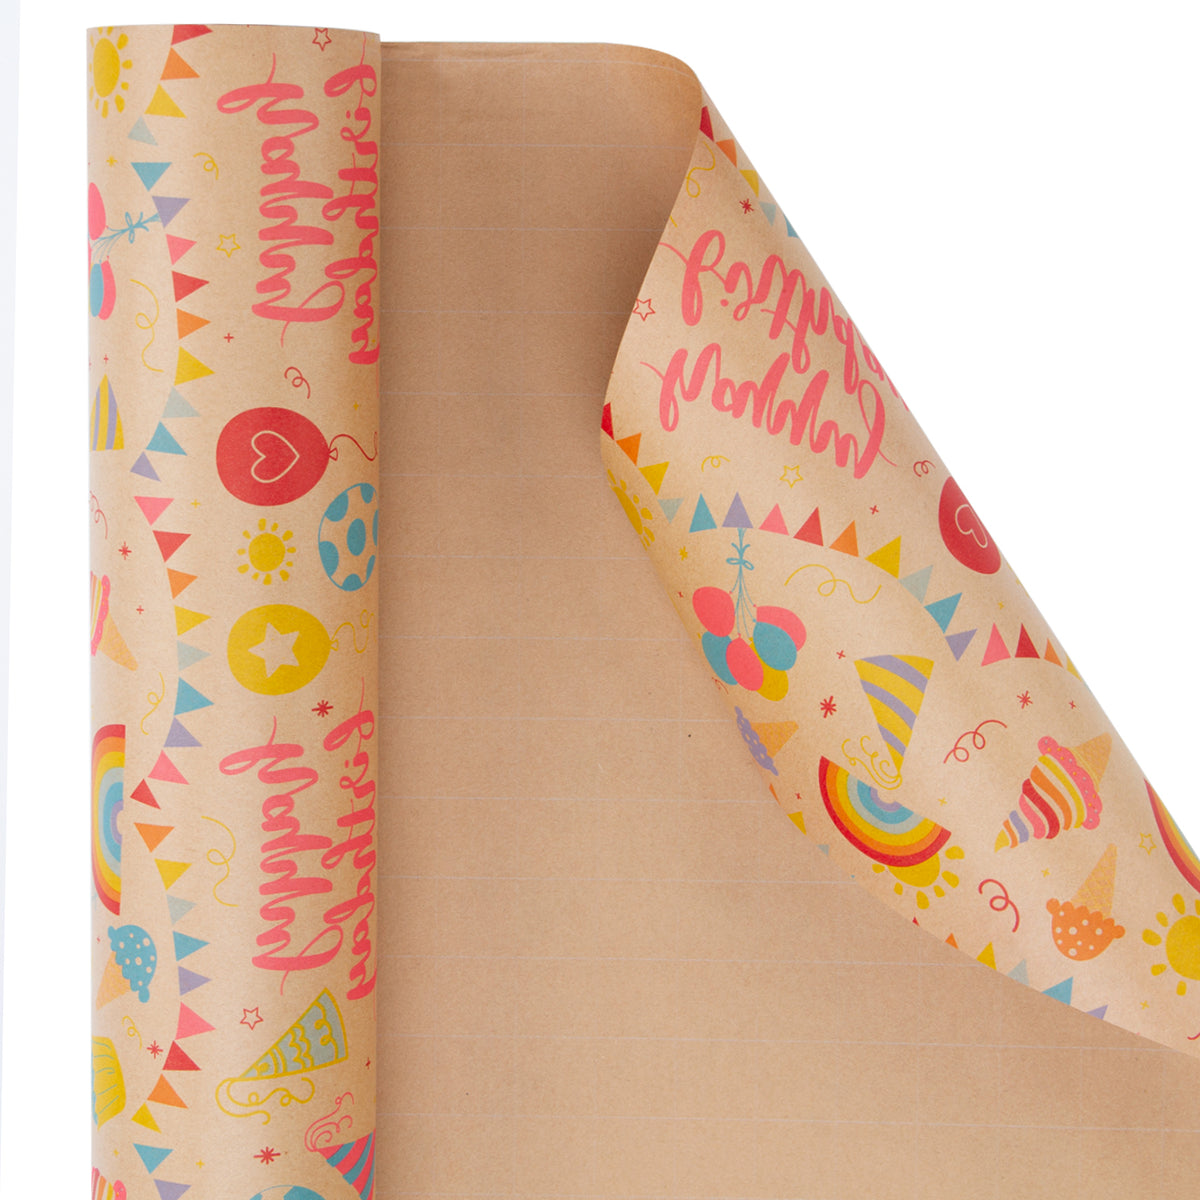 RUSPEPA Wrapping Paper Roll - Multicolor and Gold Foil Pattern for  Wedding,Birthdays, Valentines, Christmas - 5 Roll 